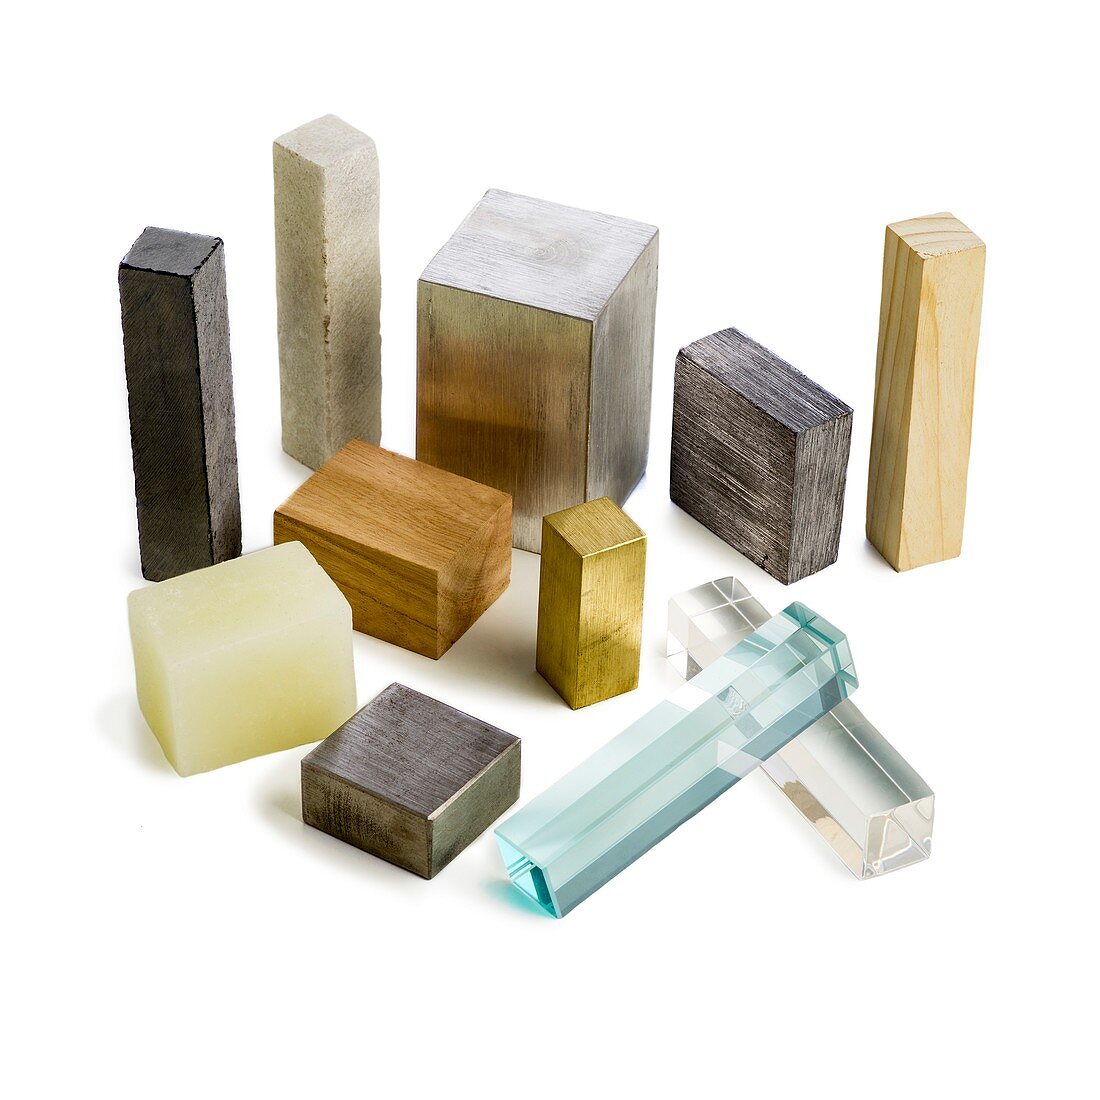 Variety of solid materials